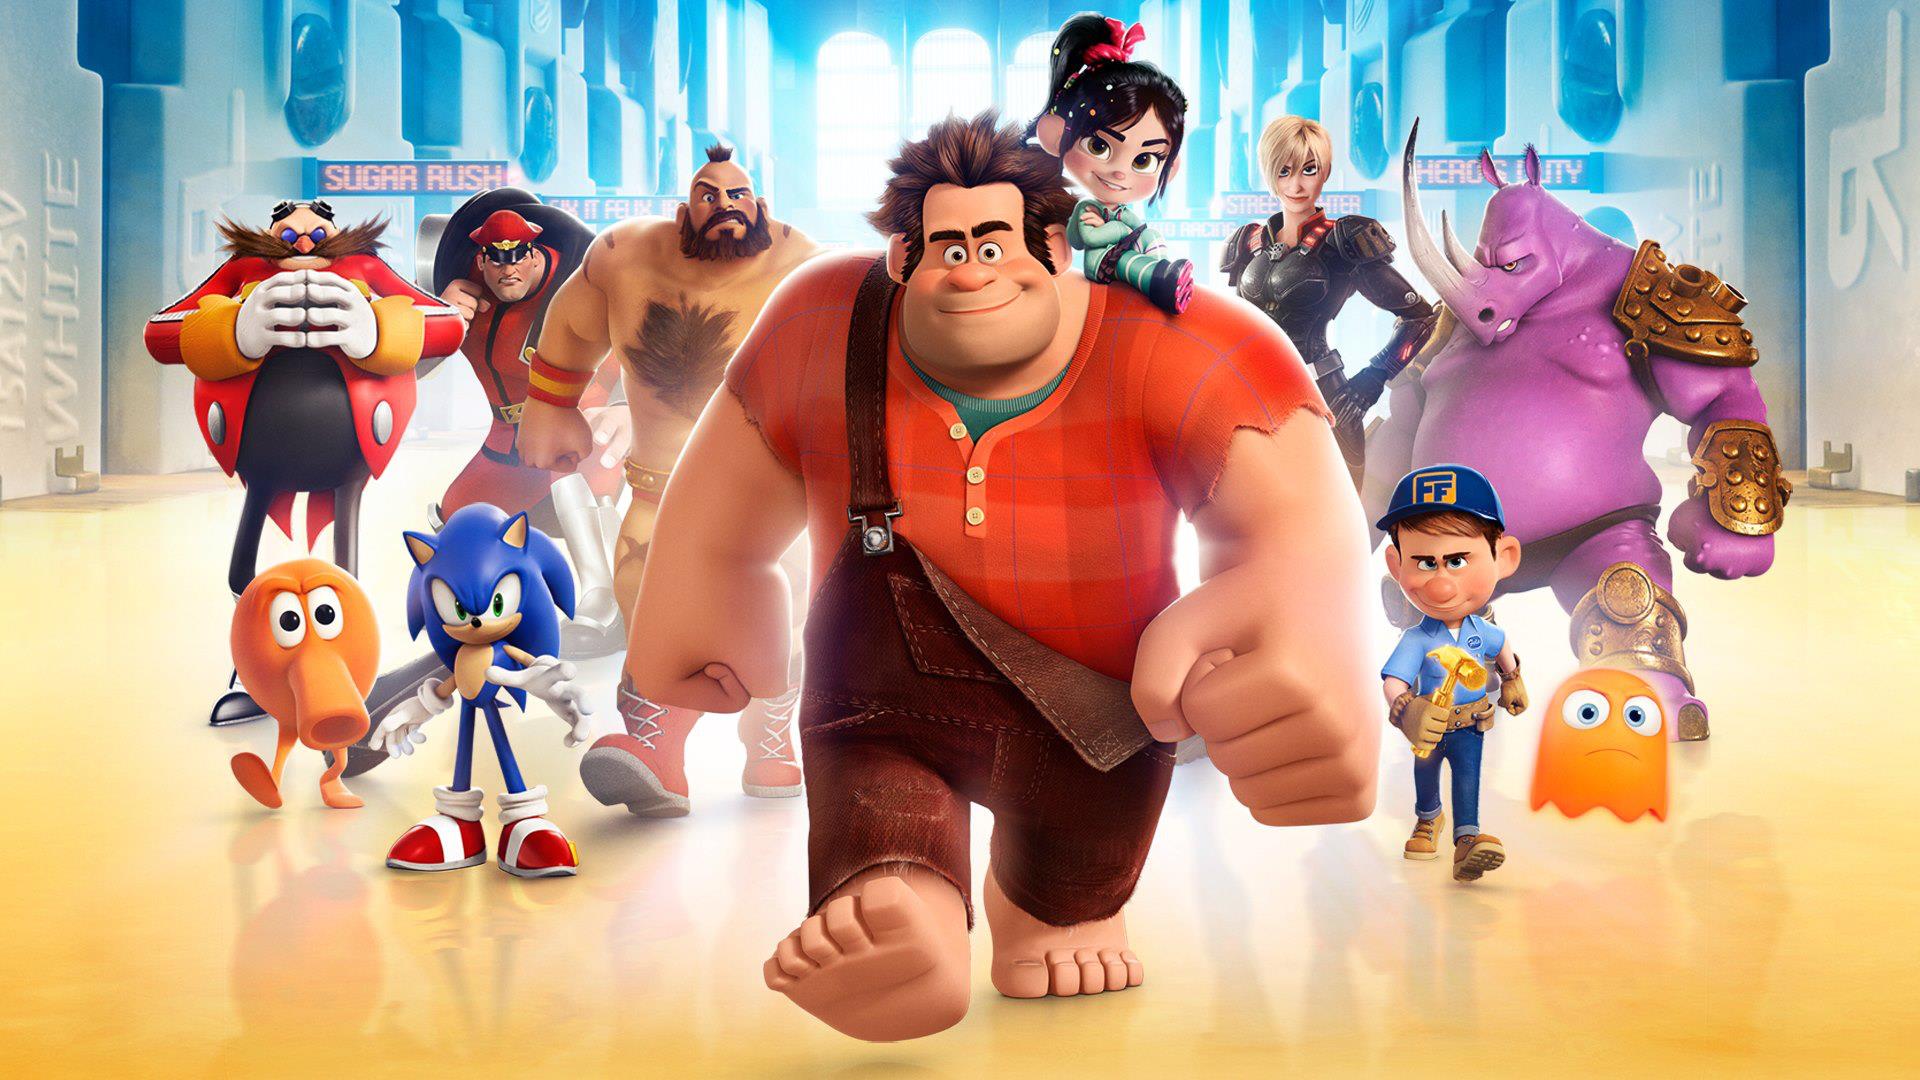 Why This GenX’er Loves Wreck-It Ralph